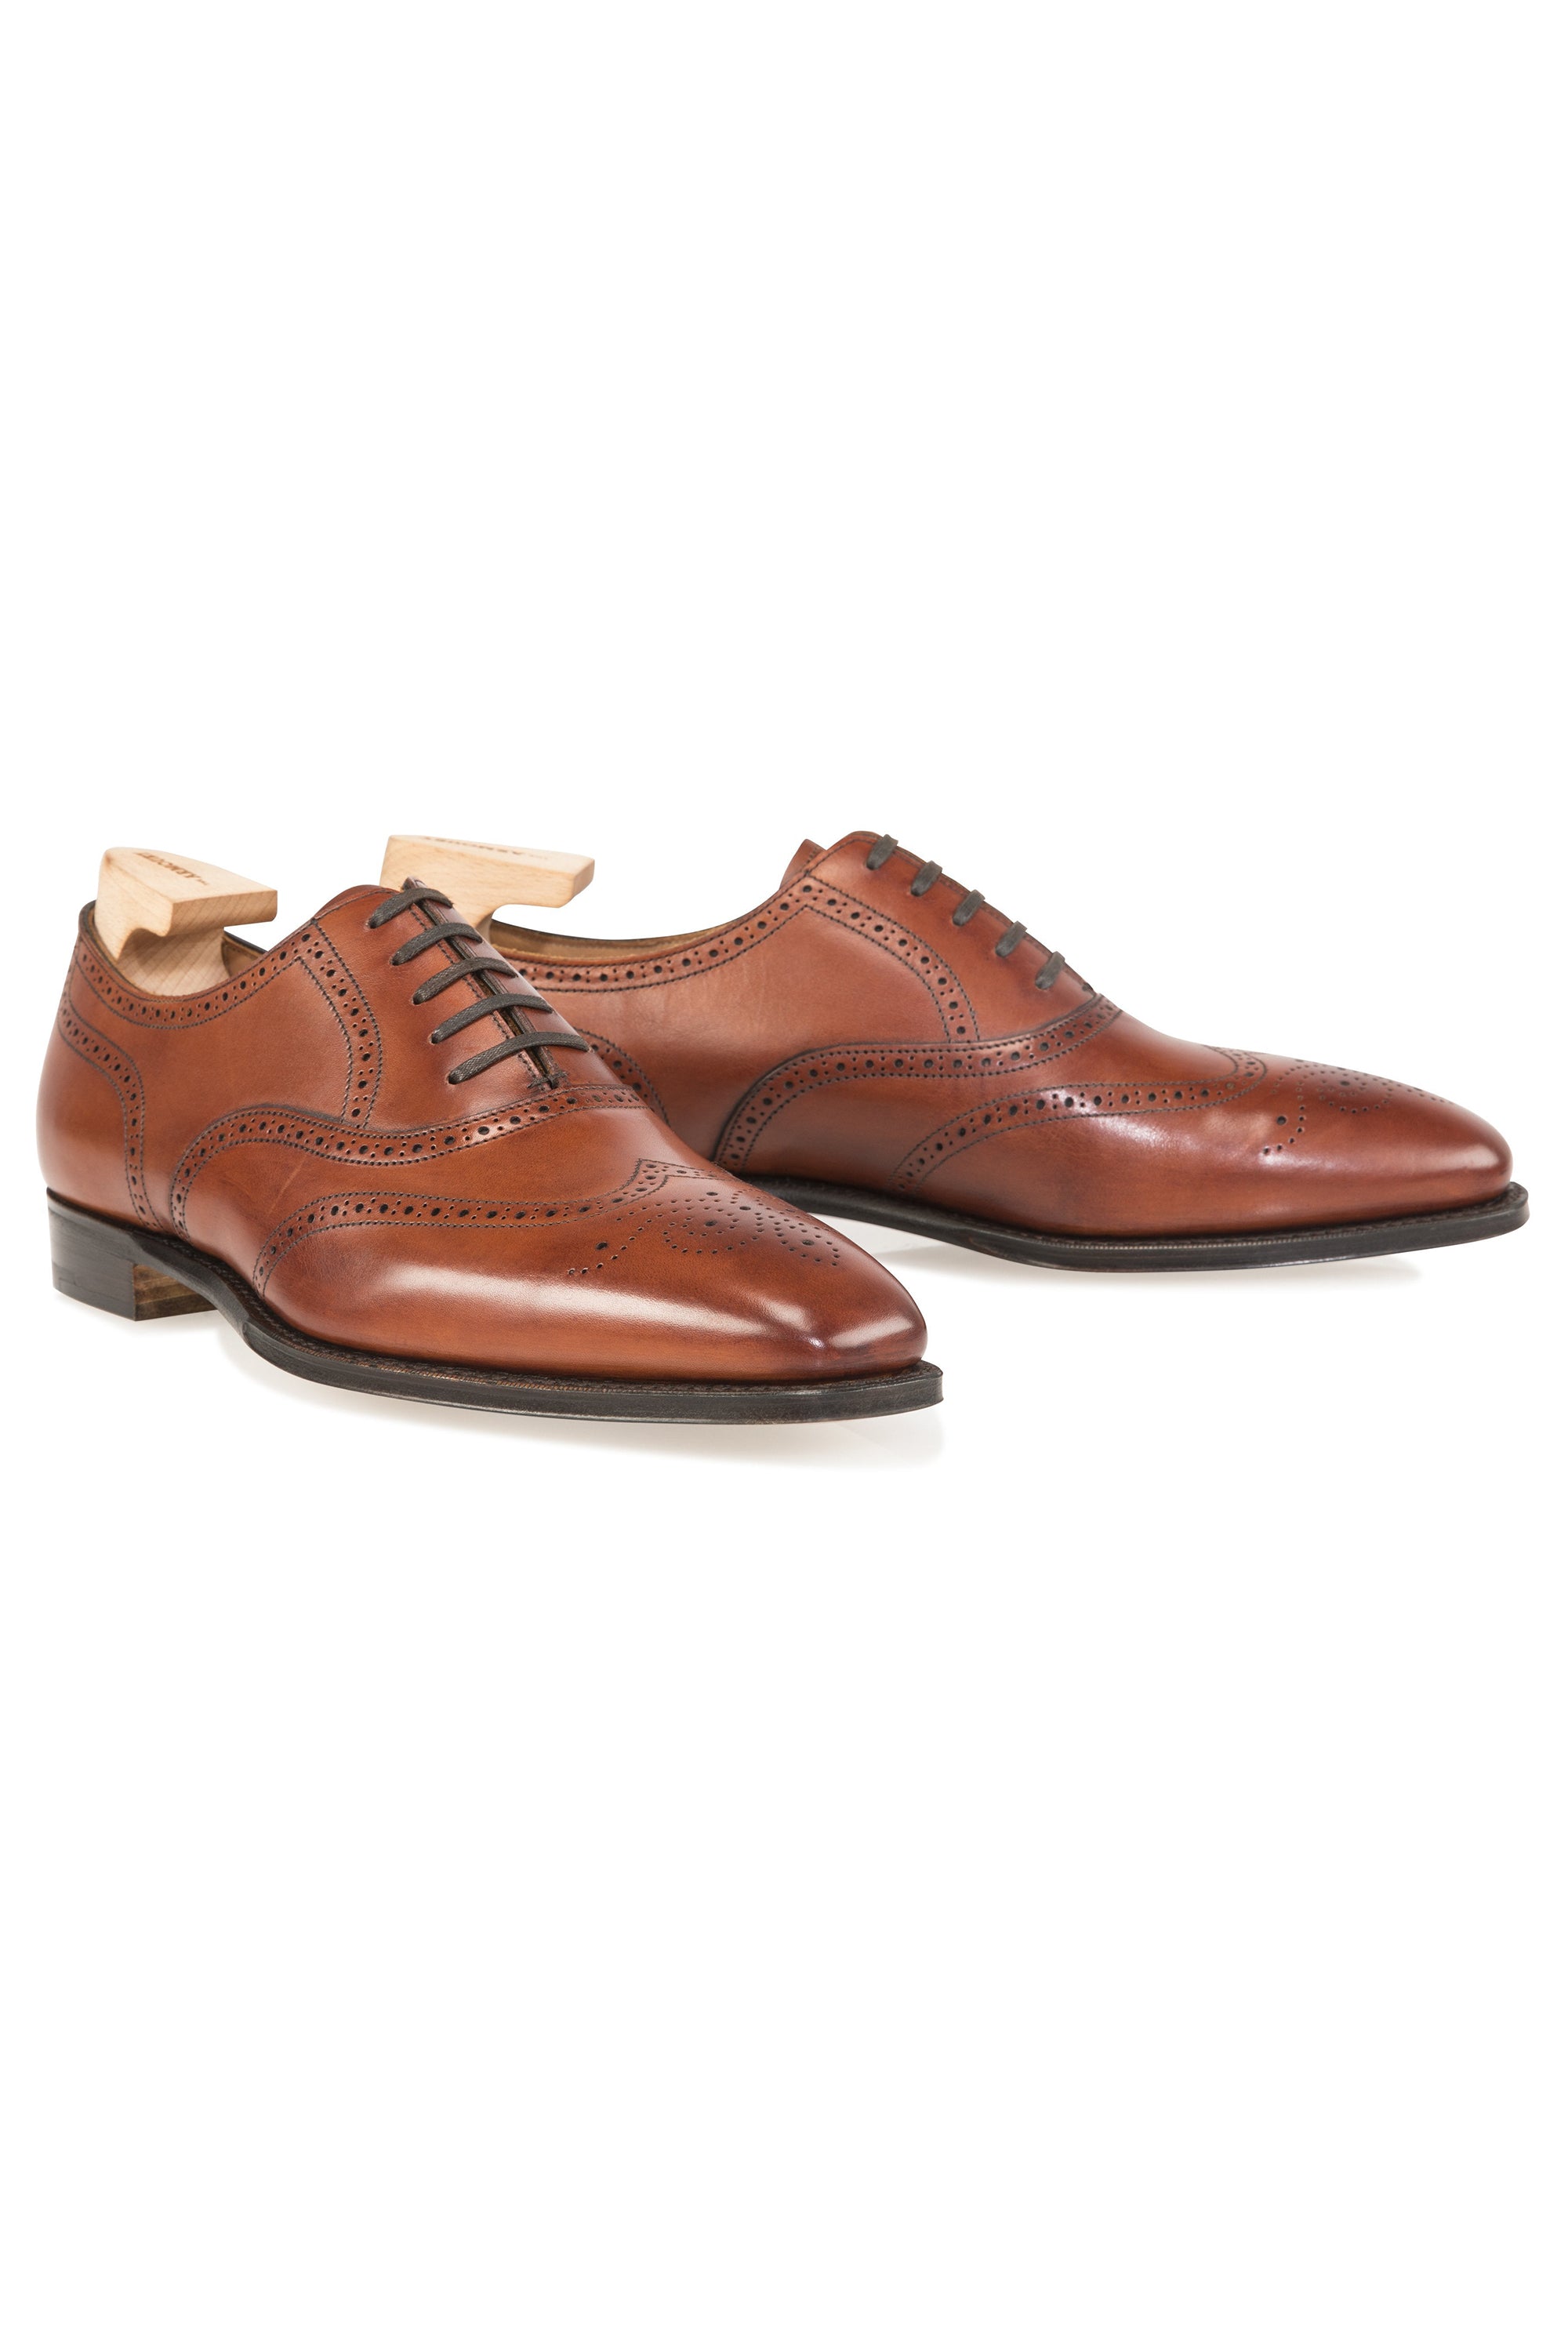 The Armoury Hajime 100355 Gloucester Chestnut Calf Oxford Shoes *factory seconds*